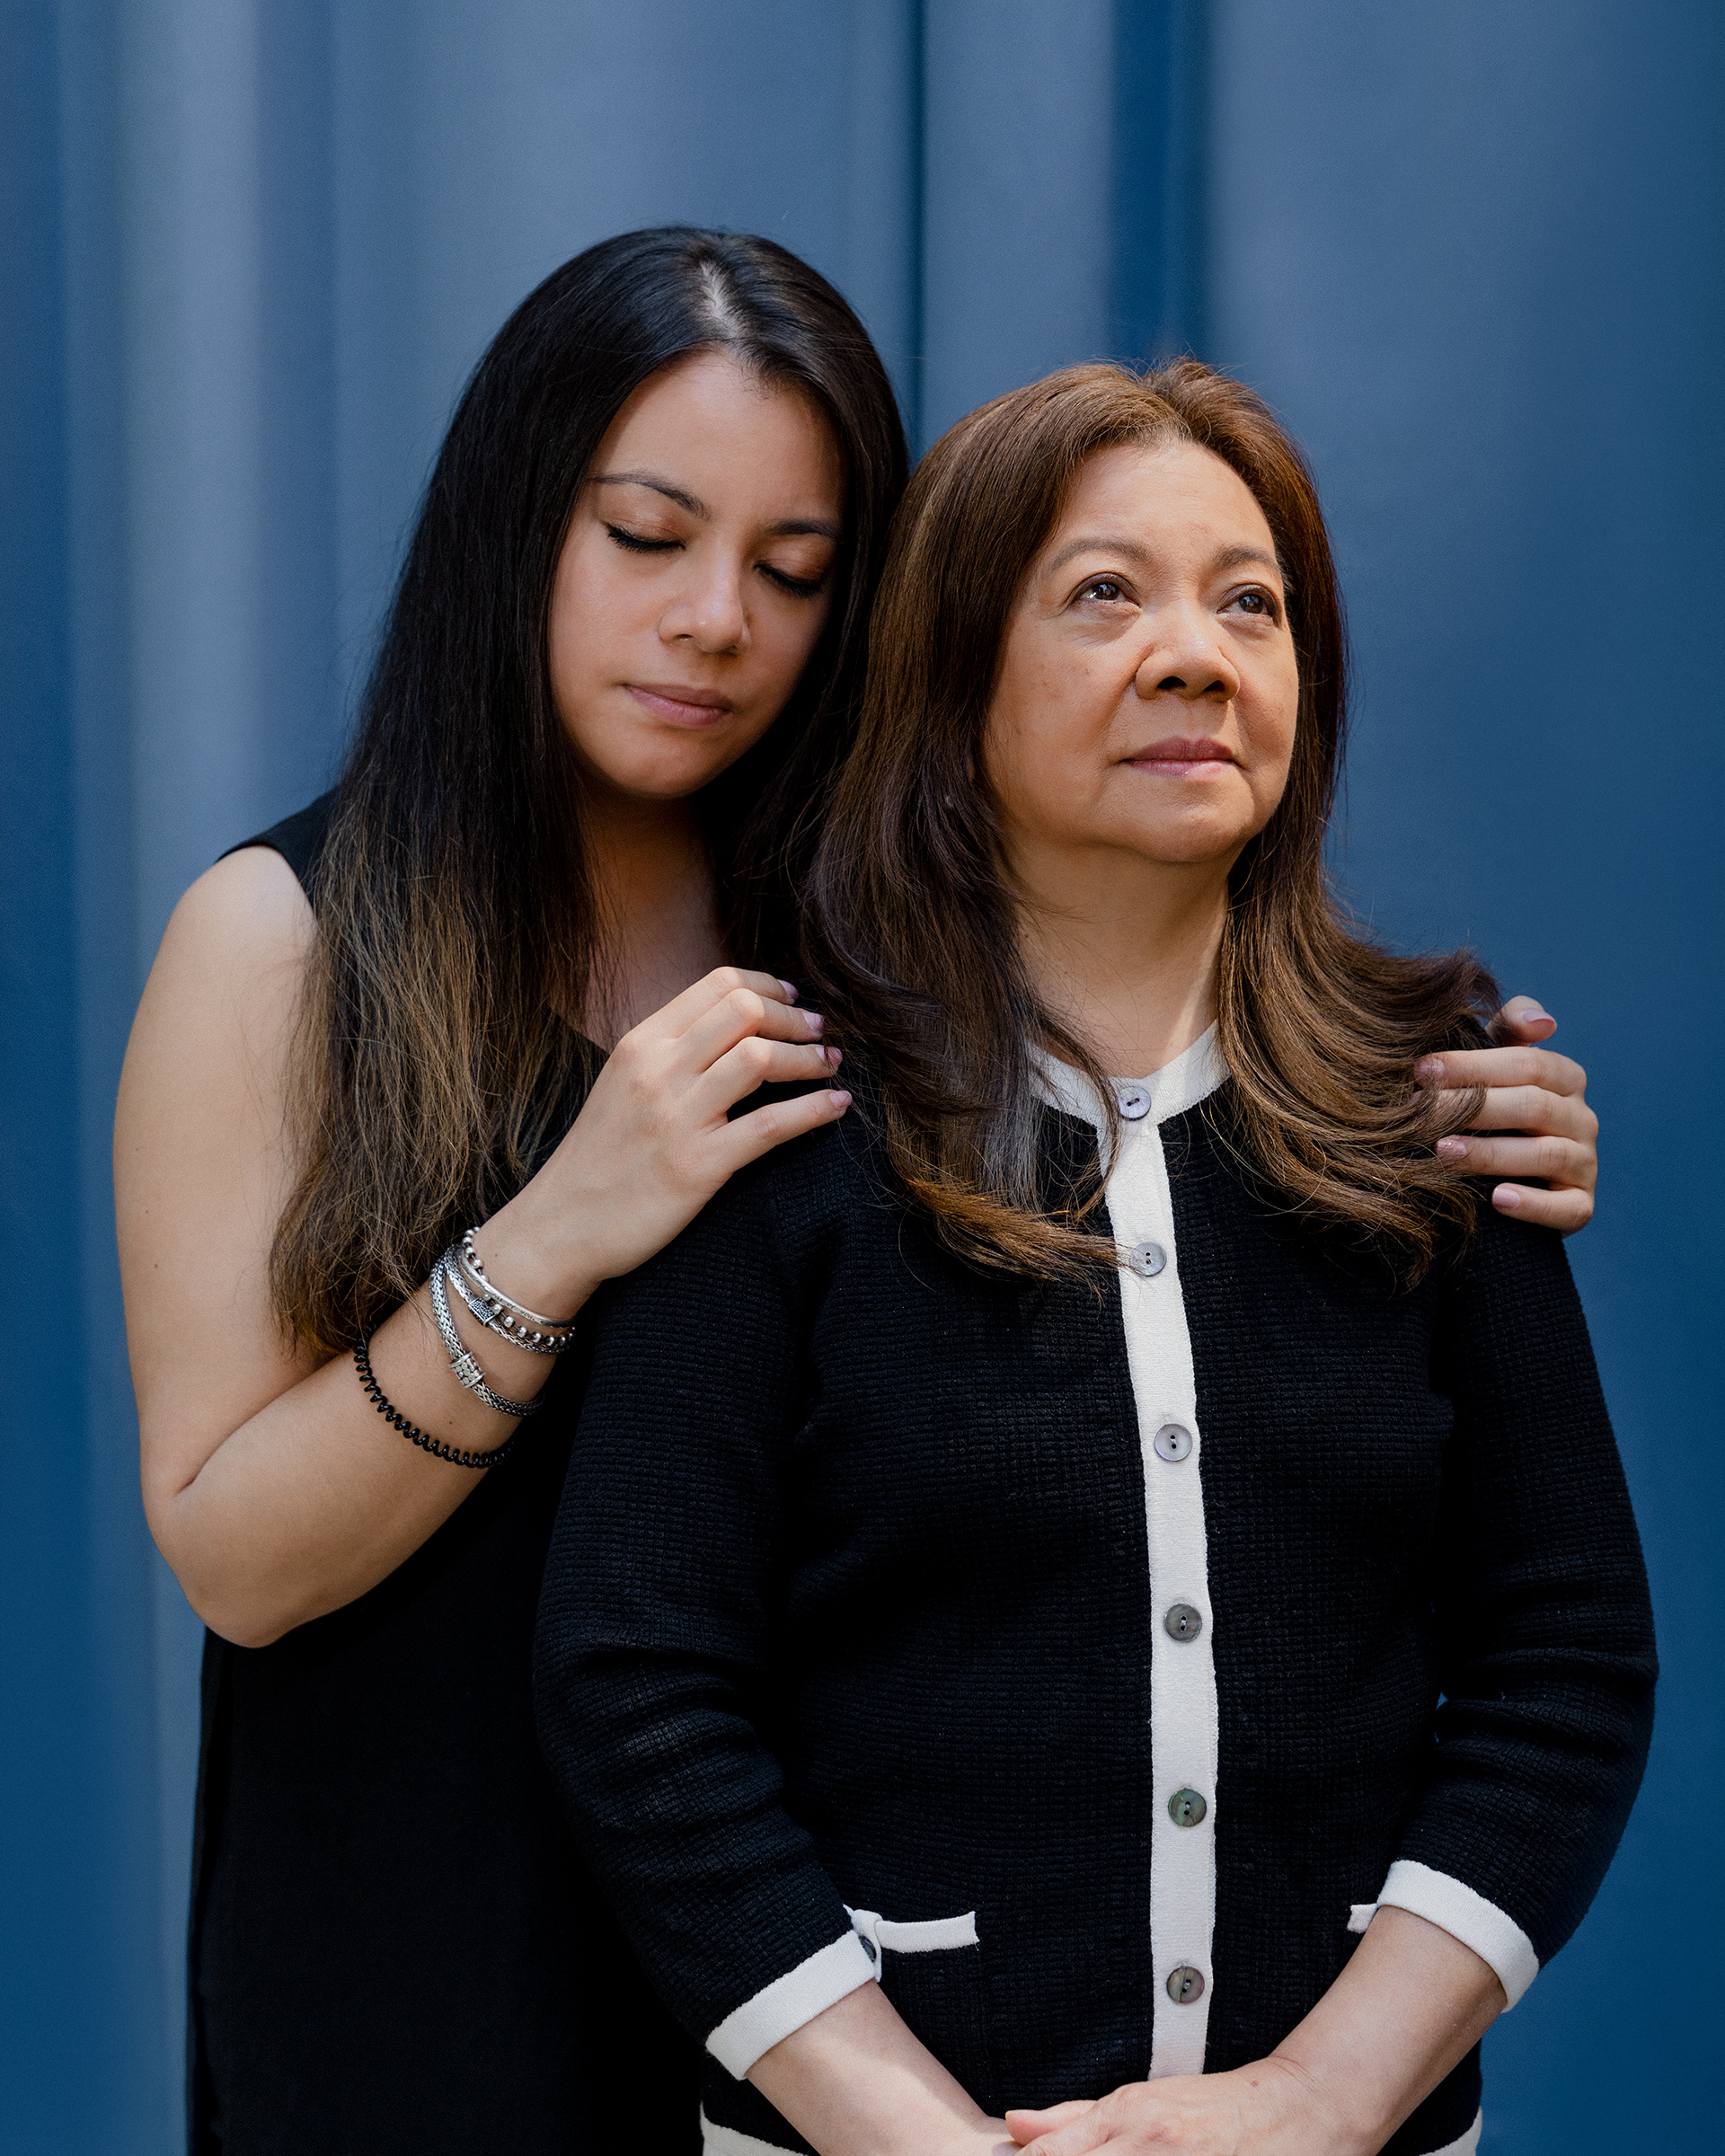 Elizabeth Kari, 32, closes her eyes as she holds her mother Vilma Kari, 66, inside her lower-Manhattan apartment building on May 21. It’s a rare moment of rest for Elizabeth, who took a two-month leave from her fashion-industry job to be her mother’s caretaker after Vilma was brutally attacked. On March 29, while she was walking to church, a man kicked her to the ground, stomped on her face and shouted, “You don’t belong here!” Because Vilma suffered serious injuries including a fractured pelvis, Elizabeth, her only child, moved her mother into her home and had to help her with basic tasks like sitting up, using the bathroom, even slowly adjusting her legs, inch by inch, to find less painful positions. “The first week, every movement she made was with me,” says Elizabeth, who also assumed the role of her mother’s emotional bodyguard, initially shielding her from any news coverage of the high-profile attack, which Vilma is still processing. “This, I feel, is the scariest time for me to be an Asian,” says Vilma, who moved to the U.S. from the Philippines nearly 40 years ago. “I never felt that before.” In May, Elizabeth created a campaign called AAP(I belong) in her mother’s honor to allow people who have encountered anti-Asian hate to anonymously share their stories online—and to subvert the attacker’s racist phrase. “I don't think it’s anyone’s right to tell anyone they don’t belong in America. That’s the cornerstone of what America is,” Elizabeth says. “And that’s what makes America so beautiful.”